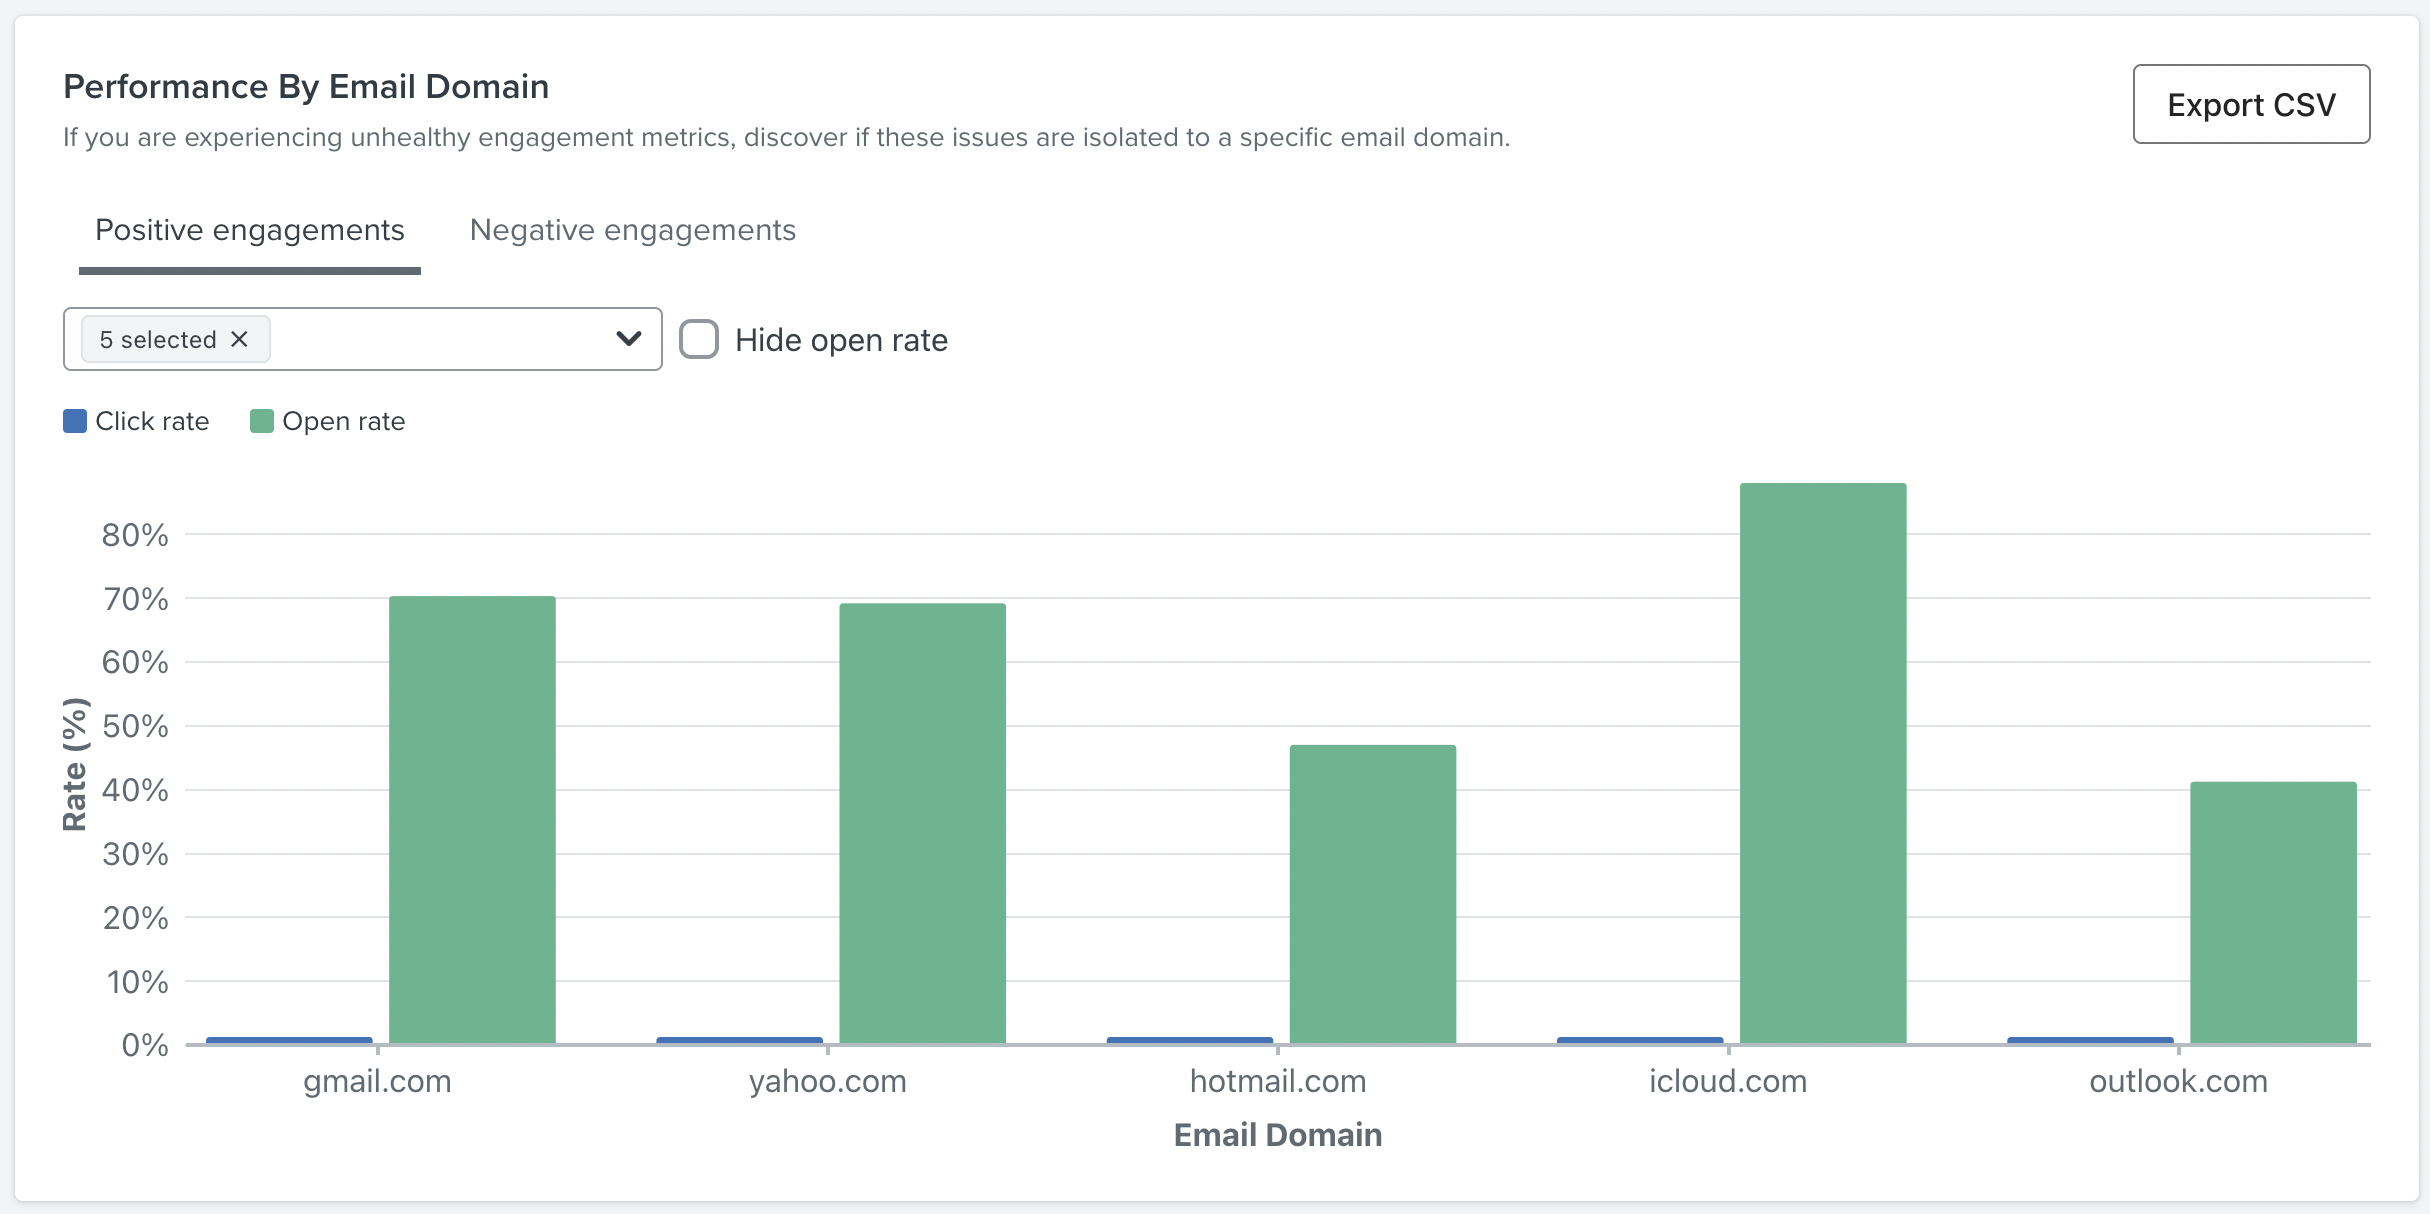 Performance by email domain showing positive enagegments